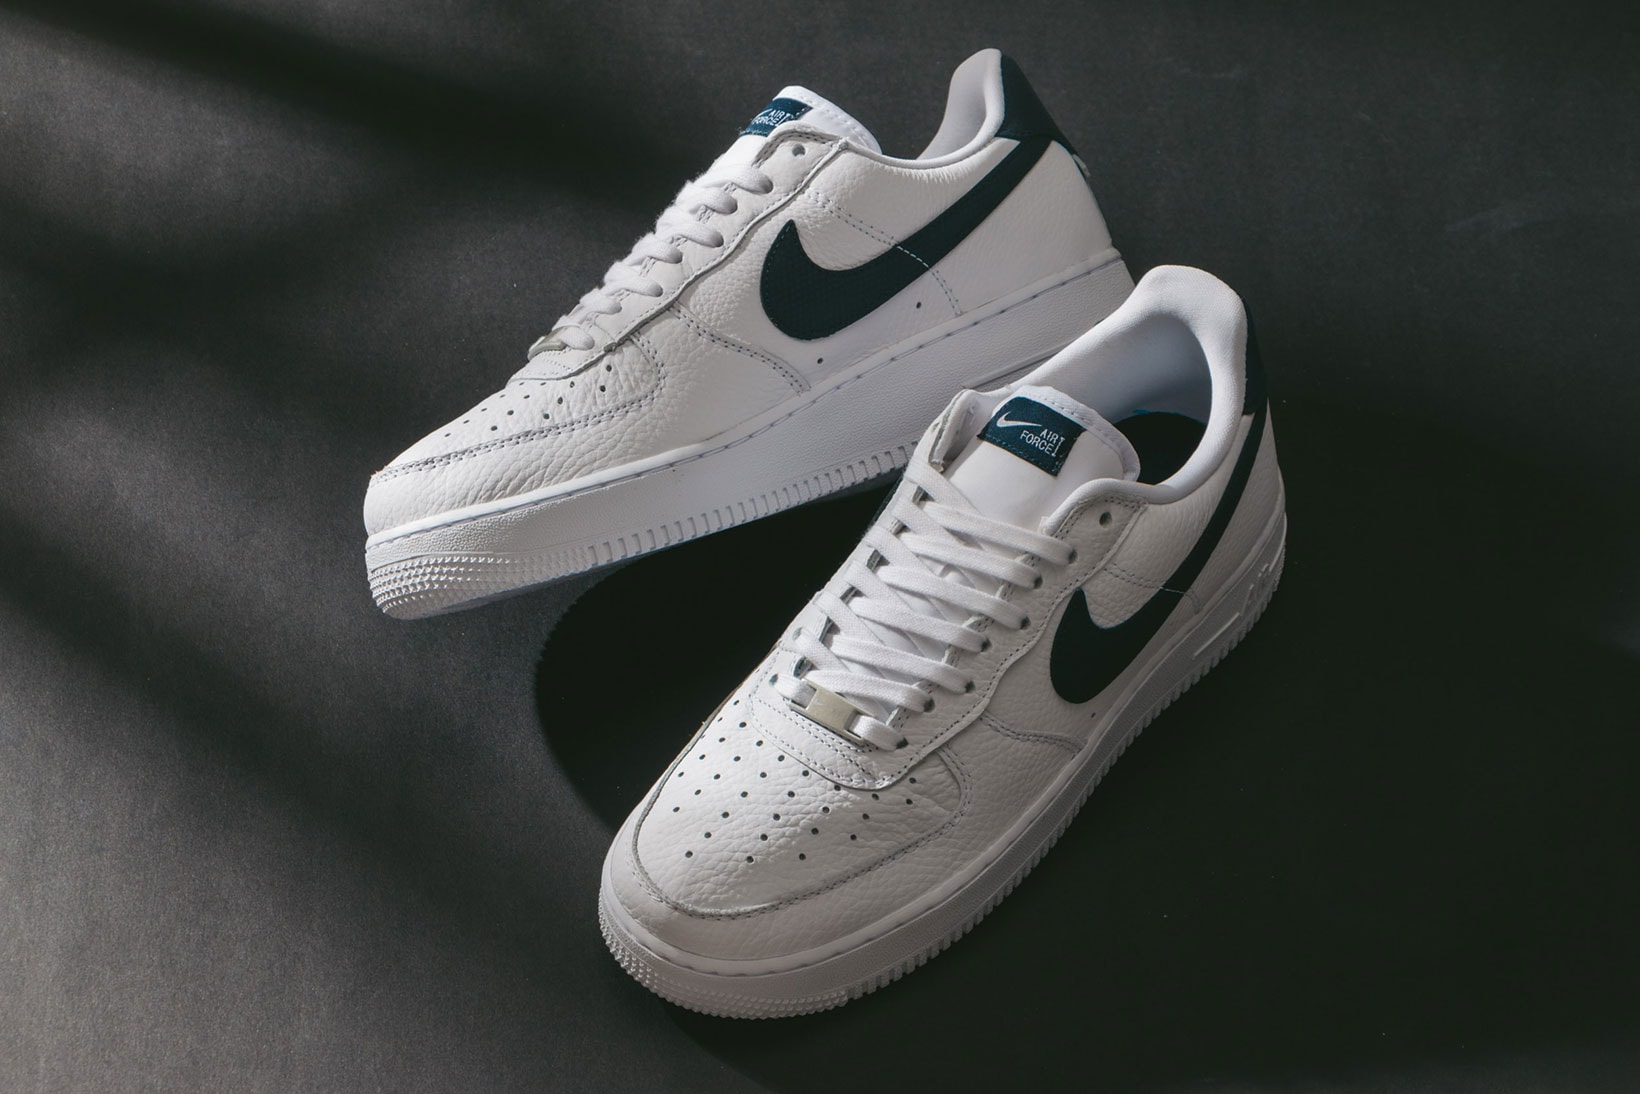 Nike Air Force 1 '07 White/Navy Blue Release